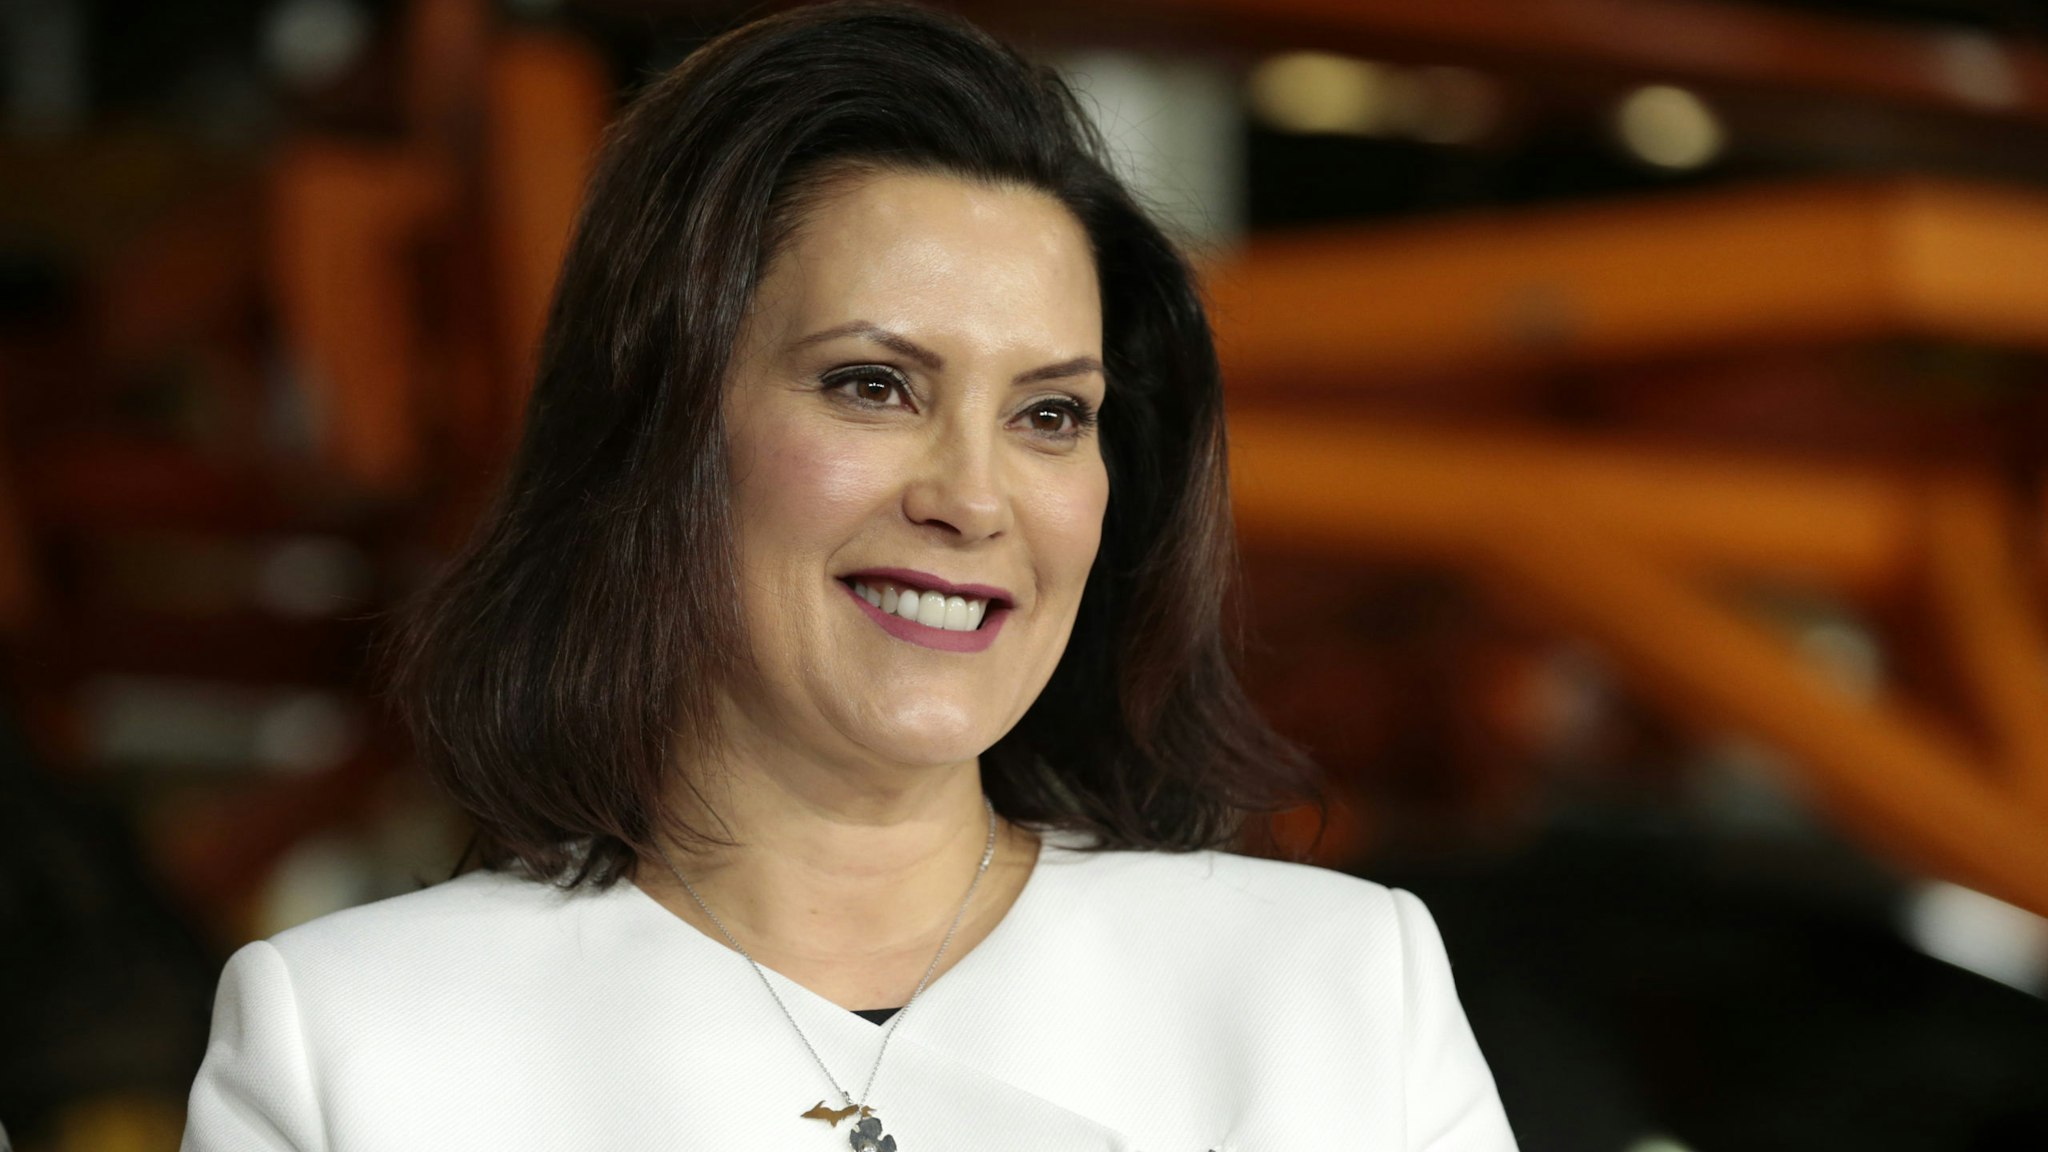 Gretchen Whitmer, governor of Michigan, smiles during an event at the General Motors Co. Orion Assembly plant in Orion Township, Michigan, U.S., on Friday, March 22, 2019. General Motors Co. committed to investing $1.8 billion at plants in six states and to creating 700 new jobs, as the largest U.S. automaker looks to ward off months of criticism by President Donald Trump. Photographer: Jeff Kowalsky/Bloomberg via Getty Images